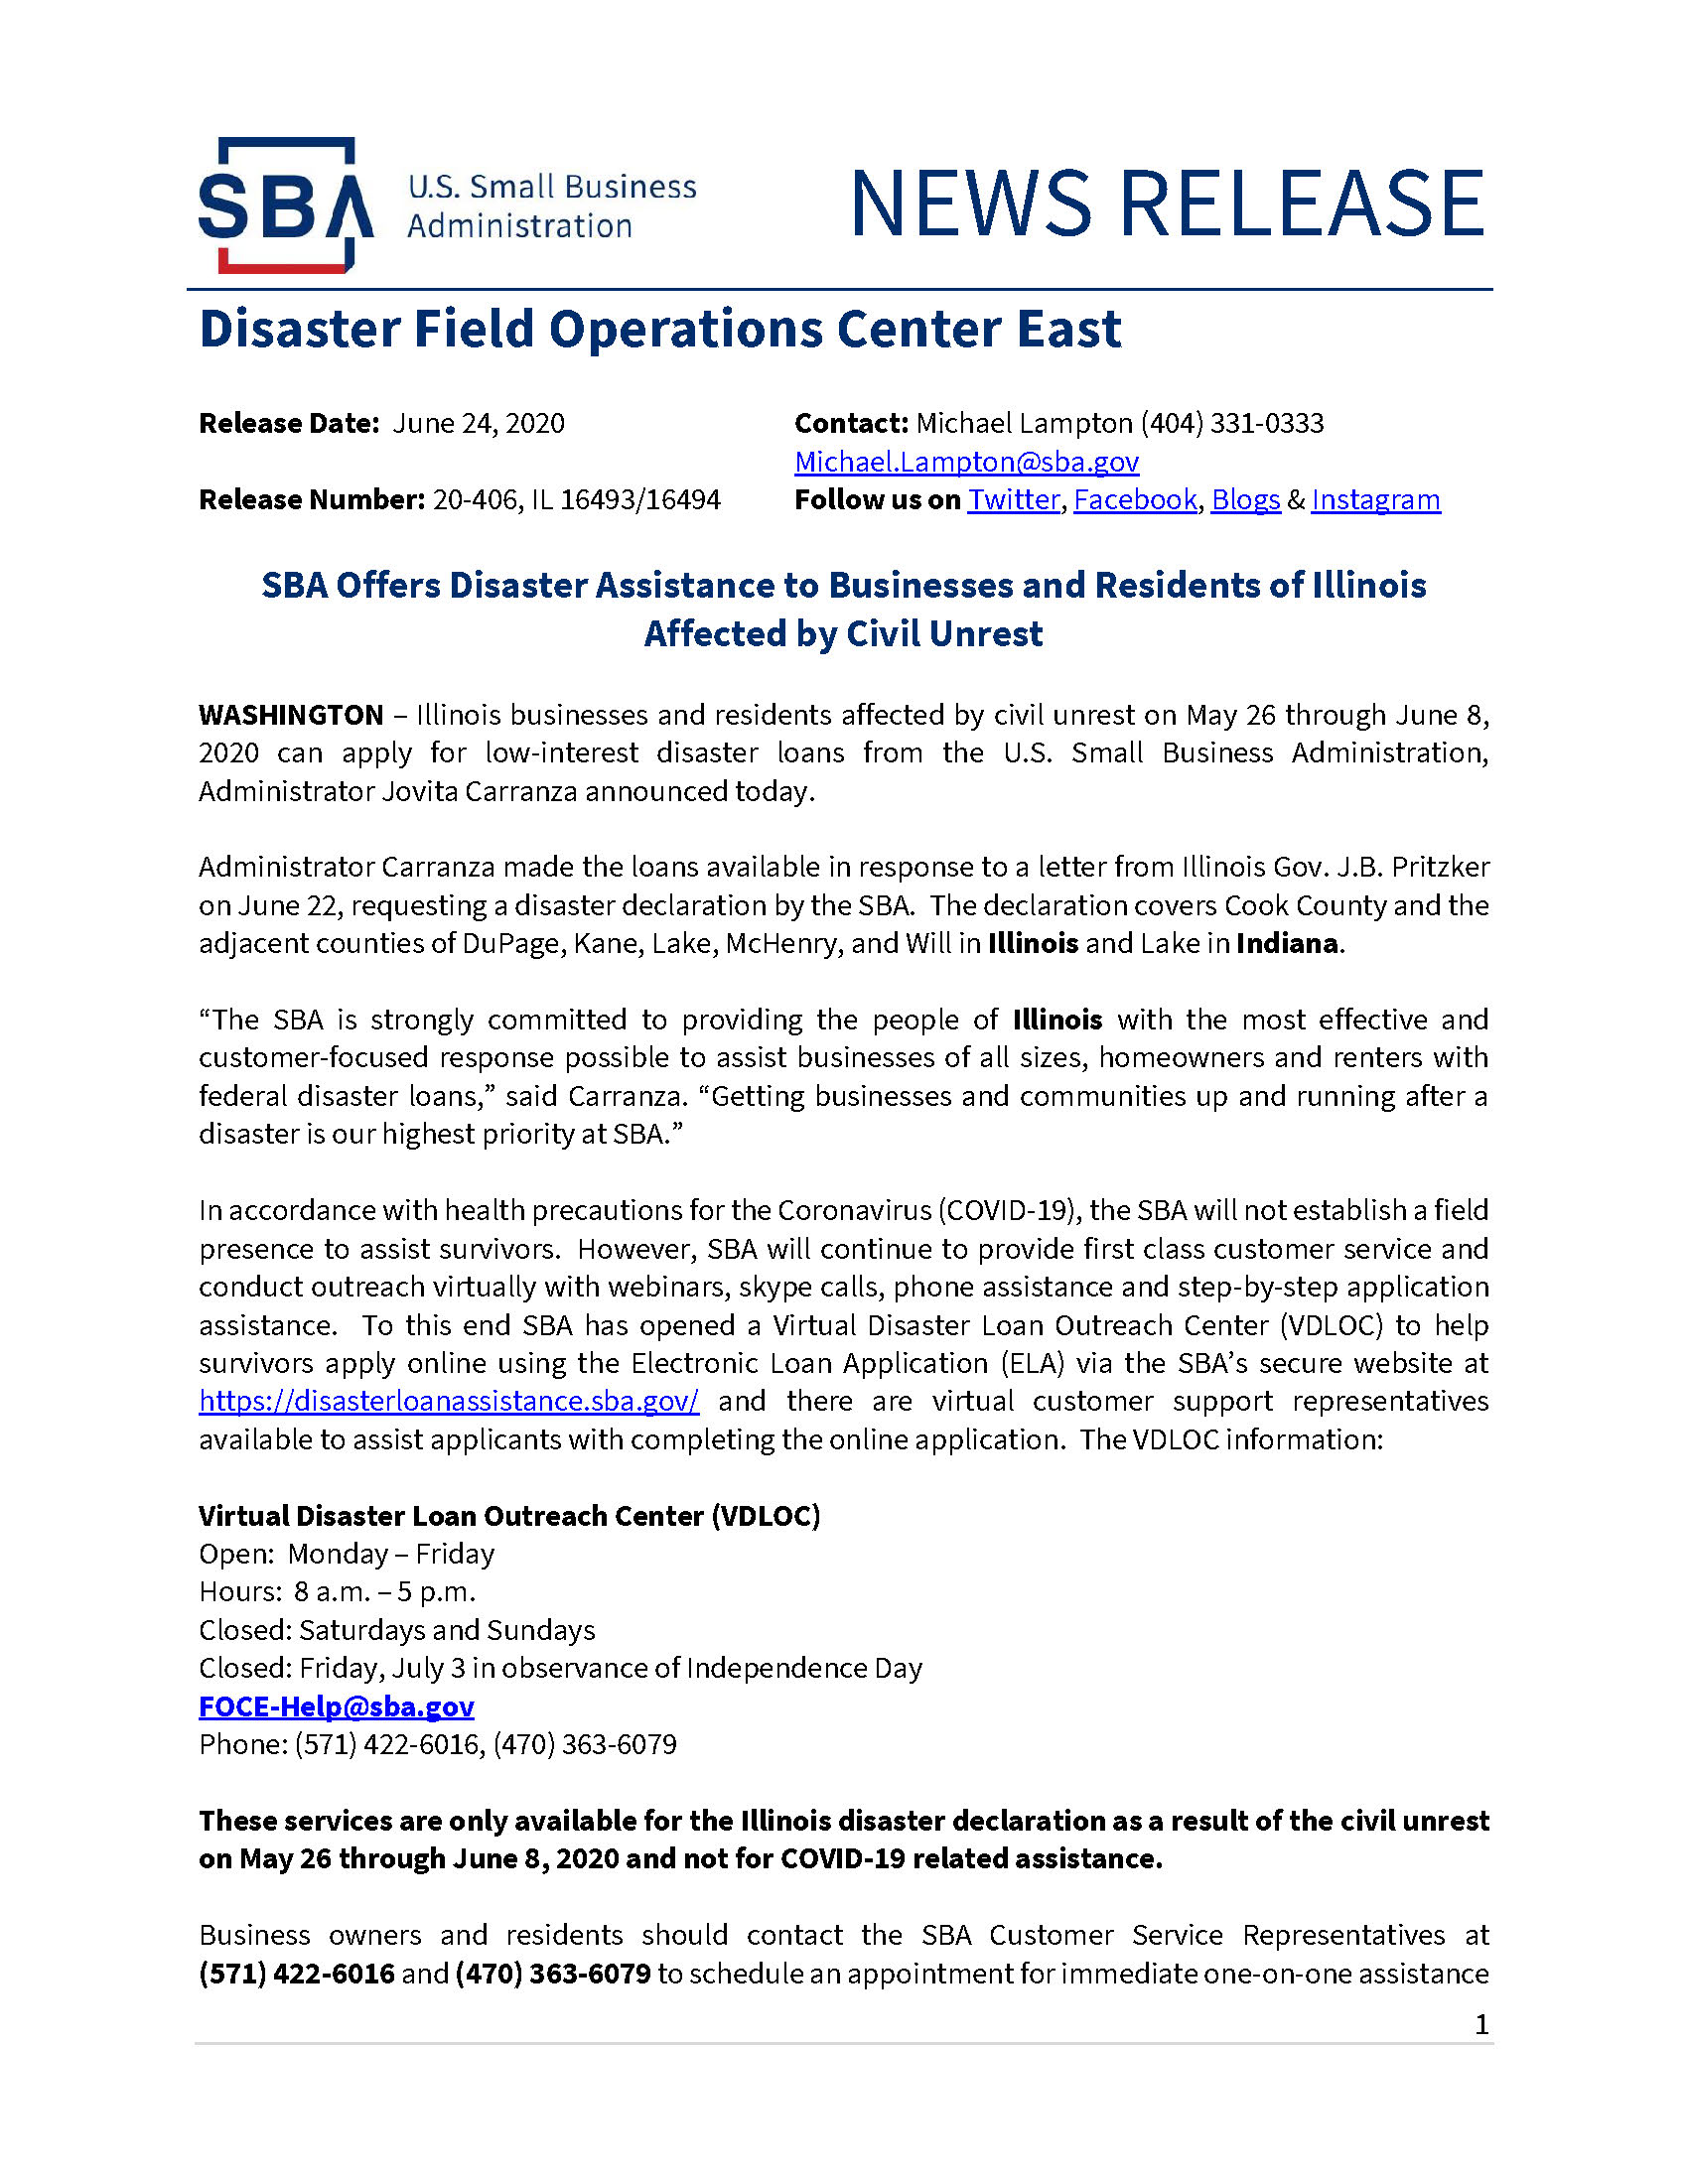 June 24 20-406 IL 16493 SBA Offers Disaster Assistance[1]_Page_1